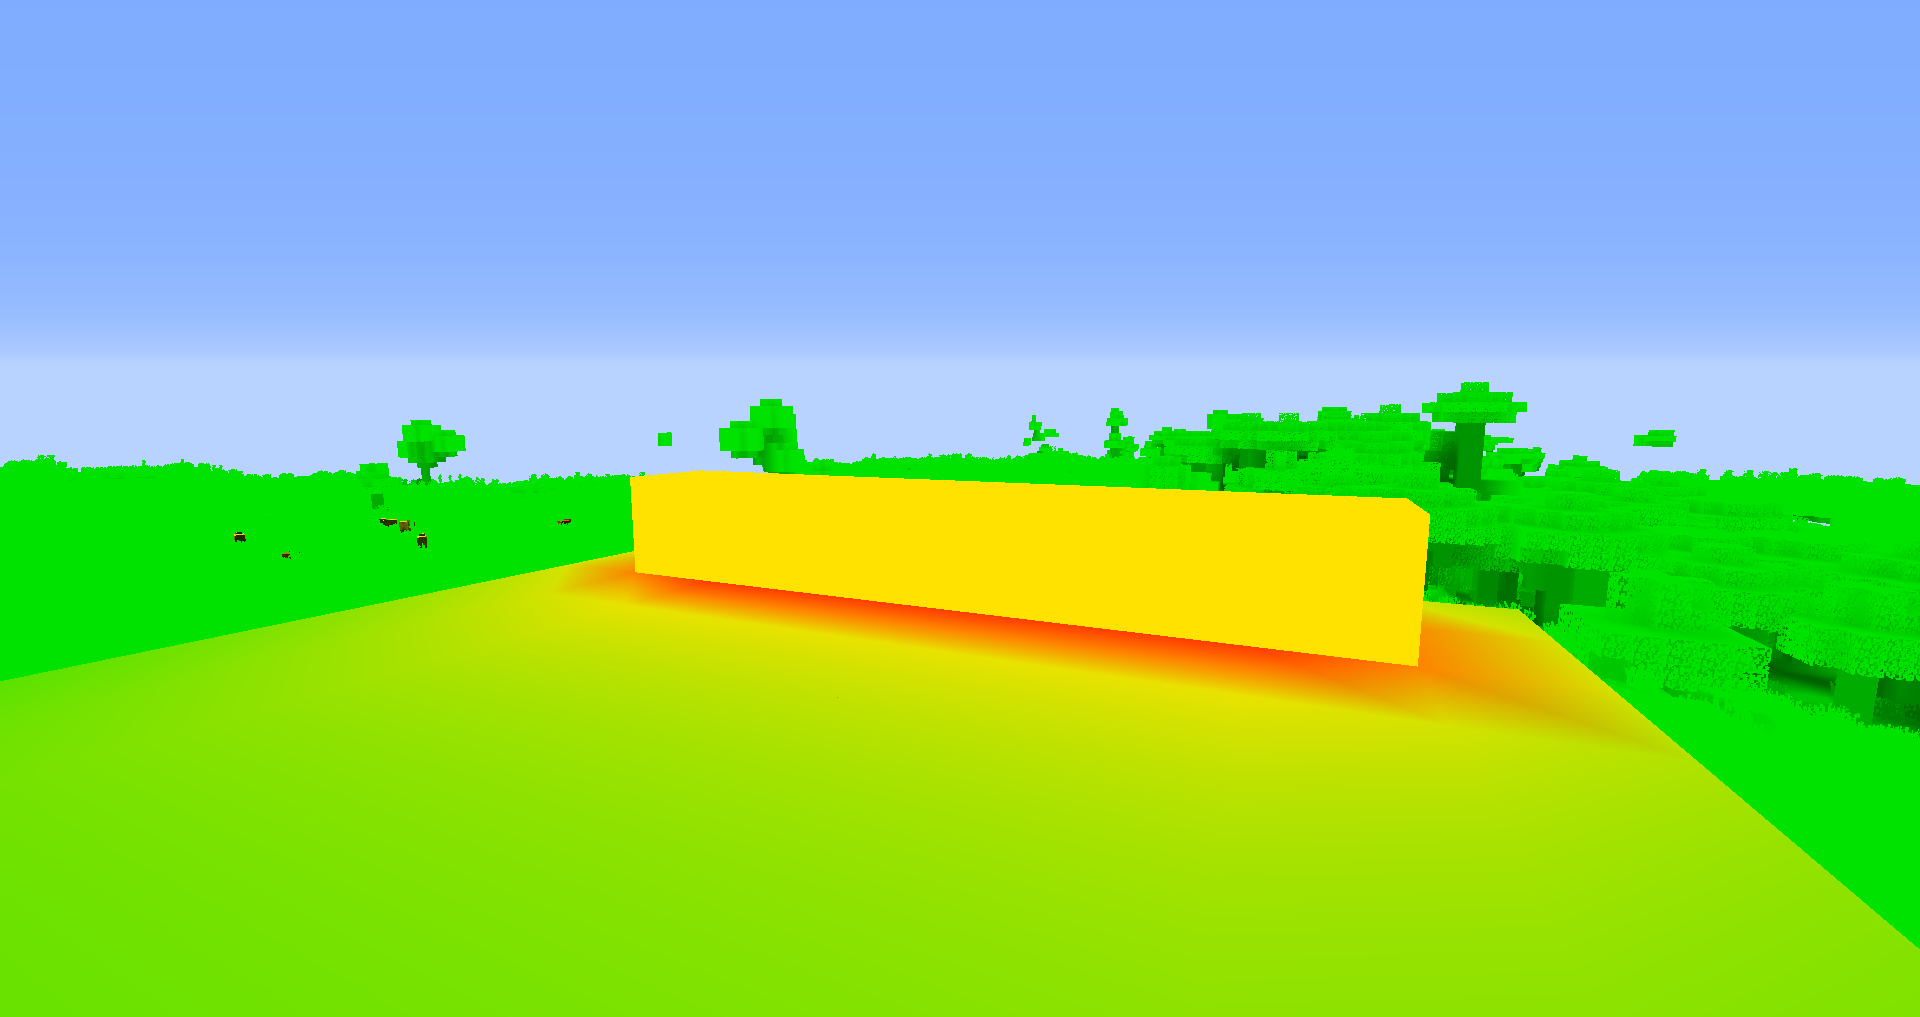 Lightmap visualised with better attenuation